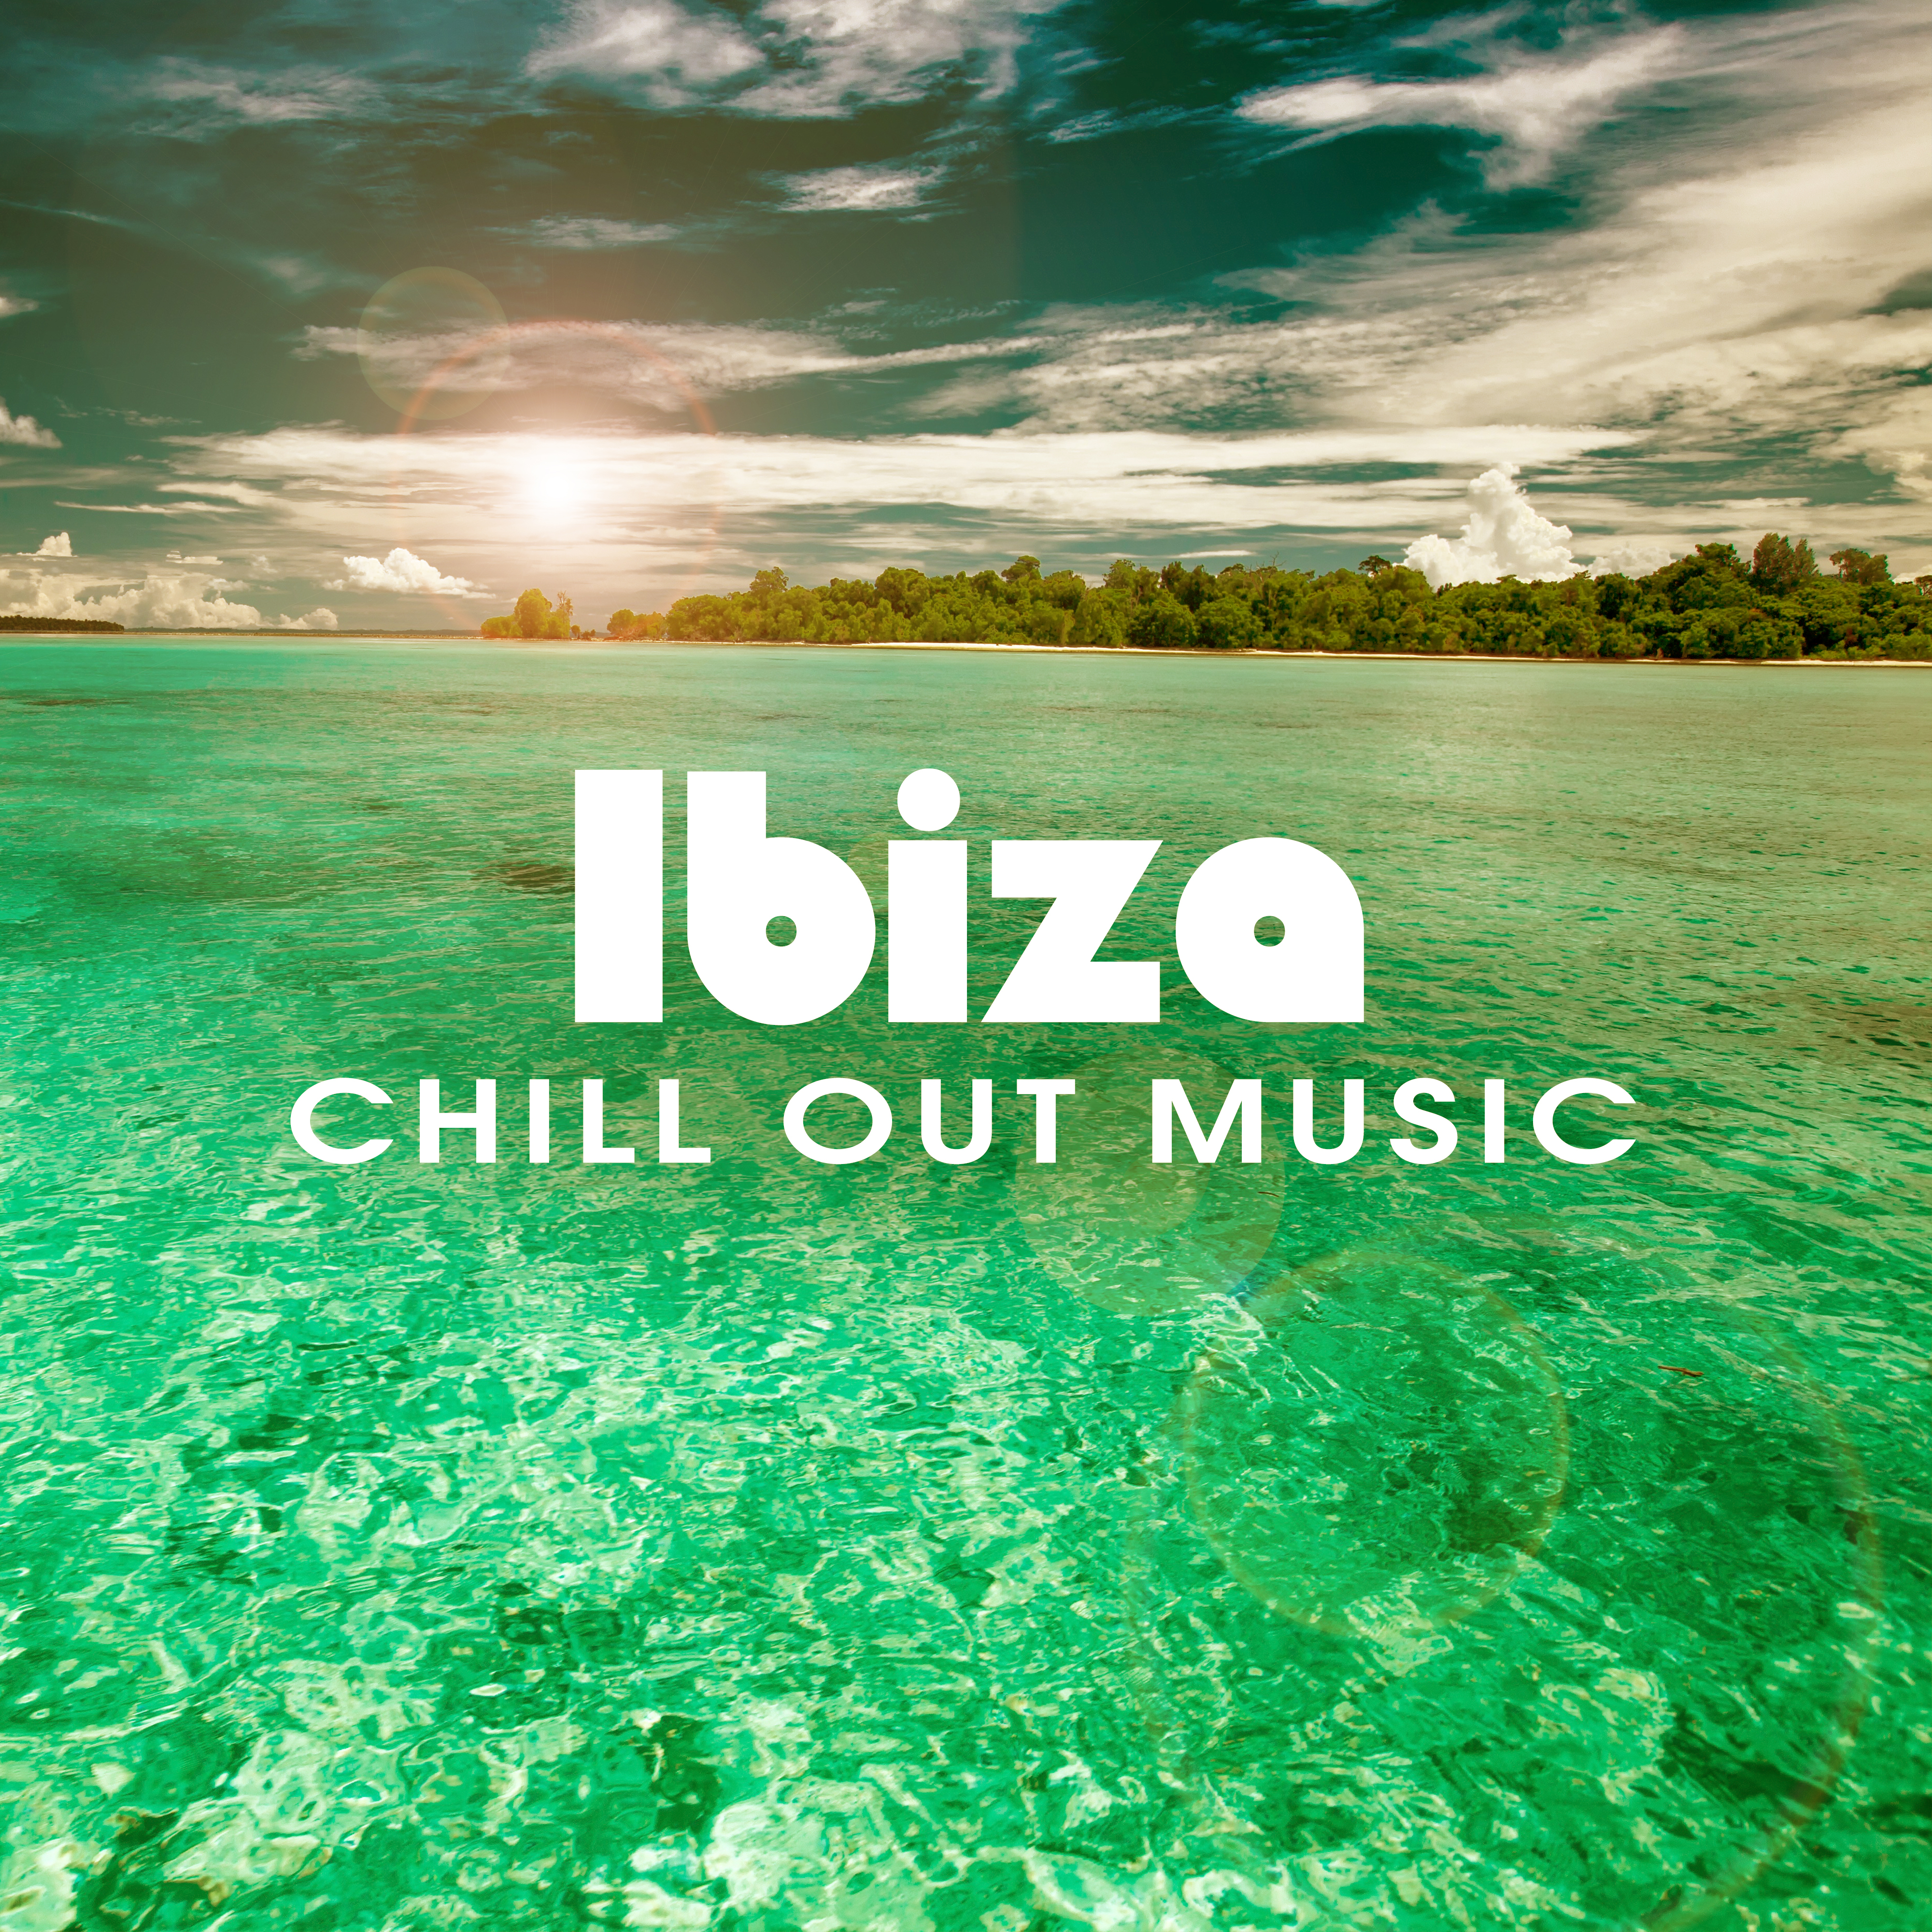 Ibiza Chill Out Music – Relaxing Chill Out Beats, Easy Listening, Stress Relief, Peaceful Songs